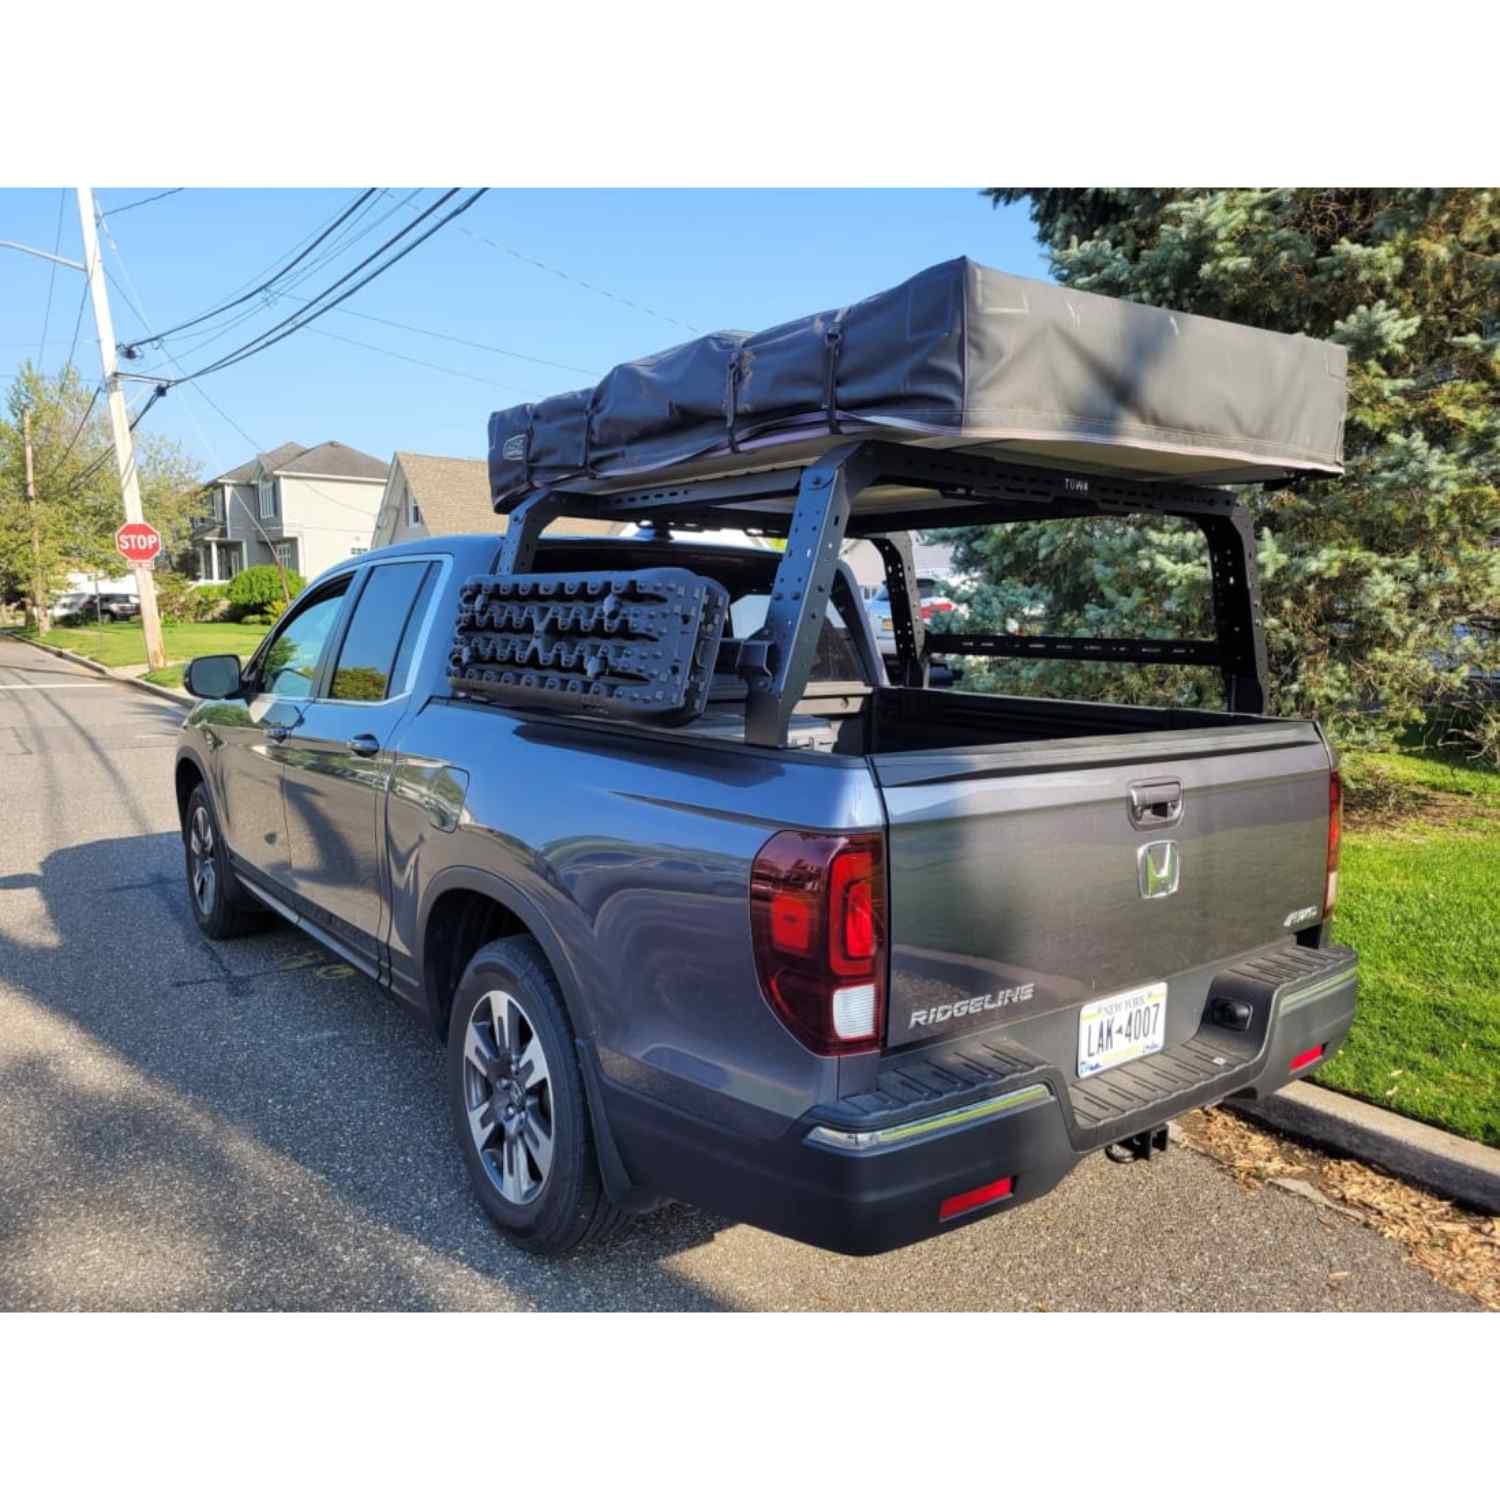 Ridgeline Shiprock Bed Rack Mounted View with Cargo on top